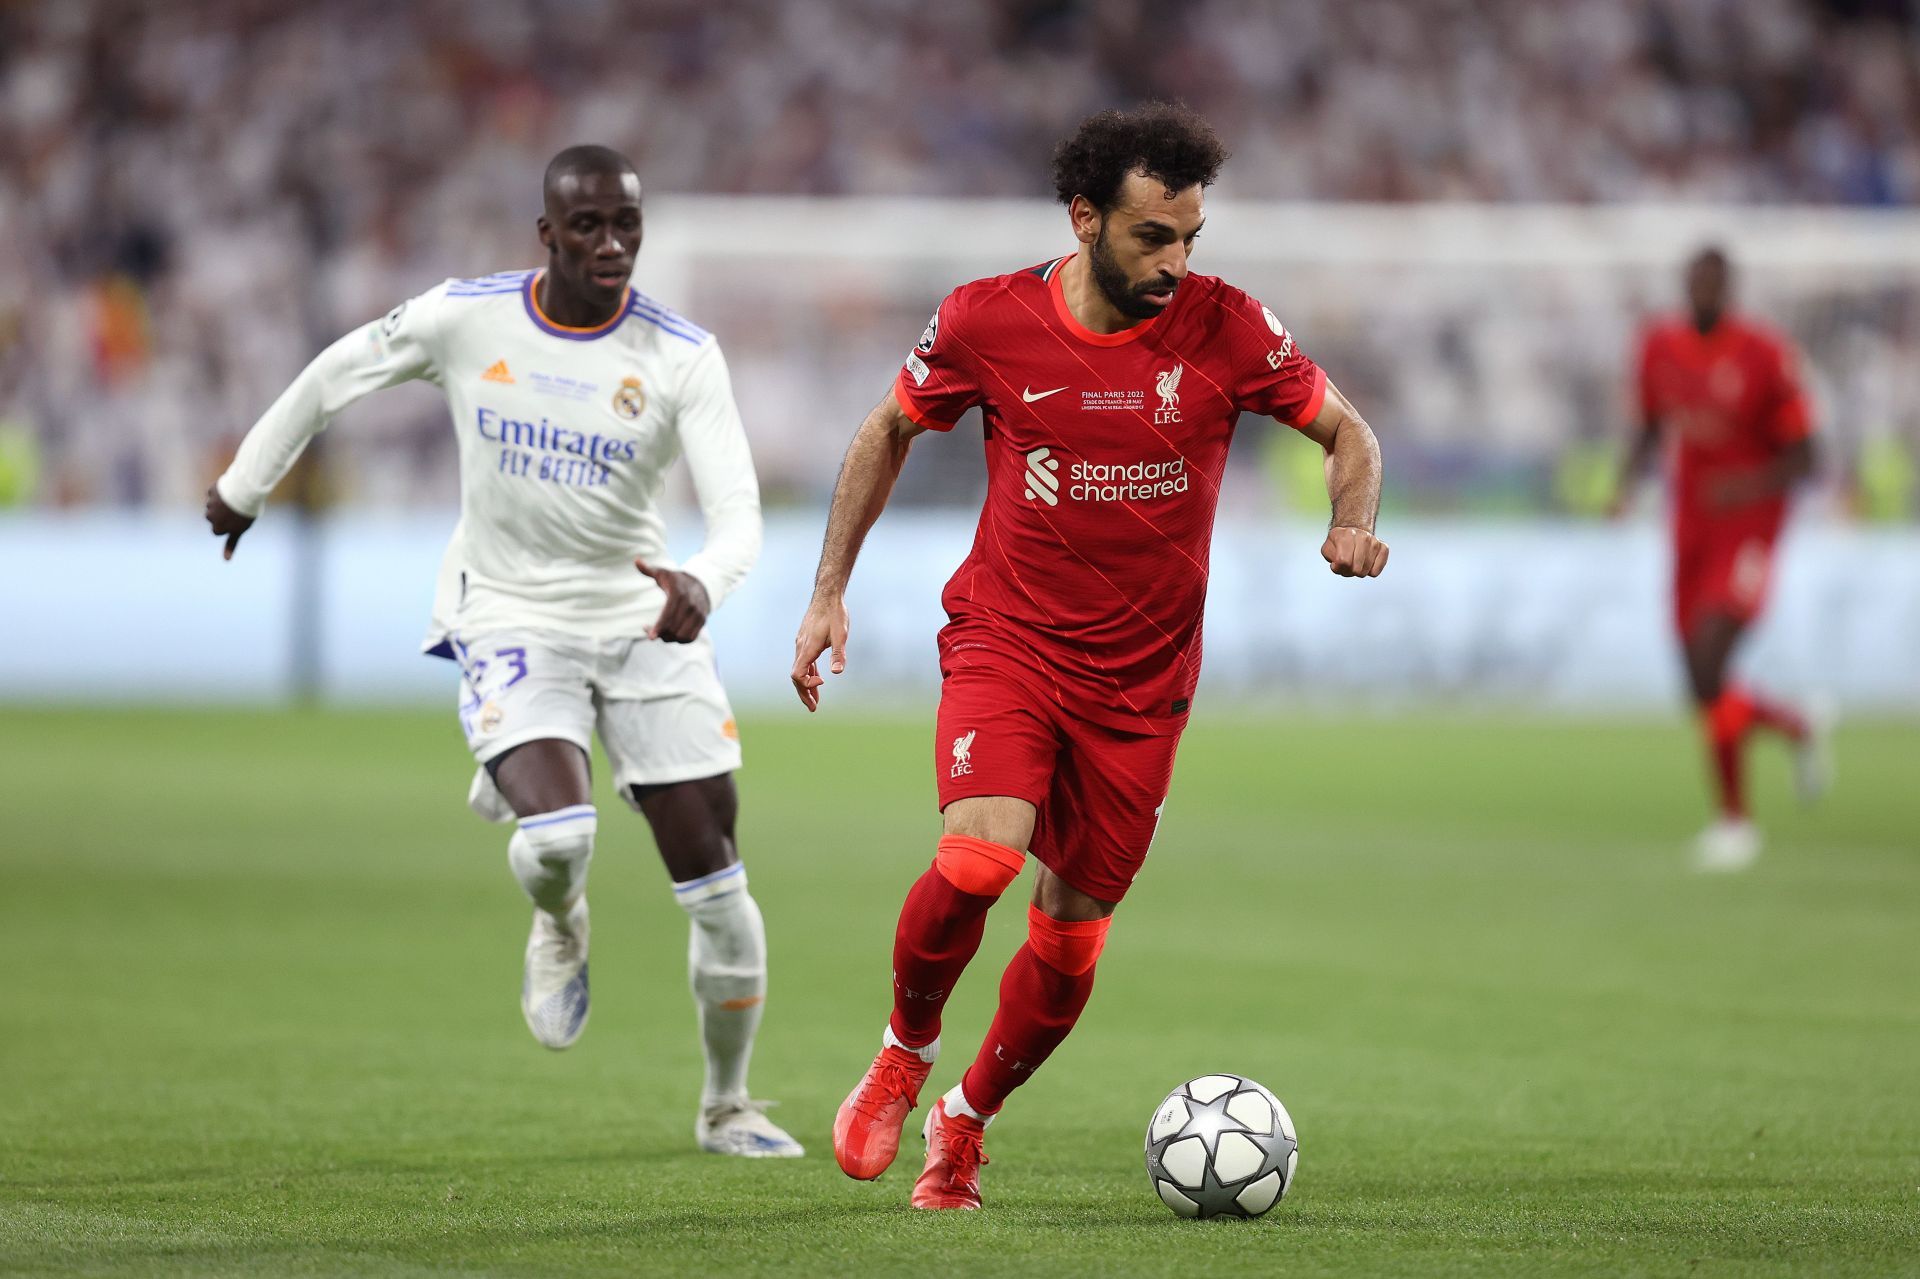 Mohamed Salah was ready to move to Stamford Bridge this summer.